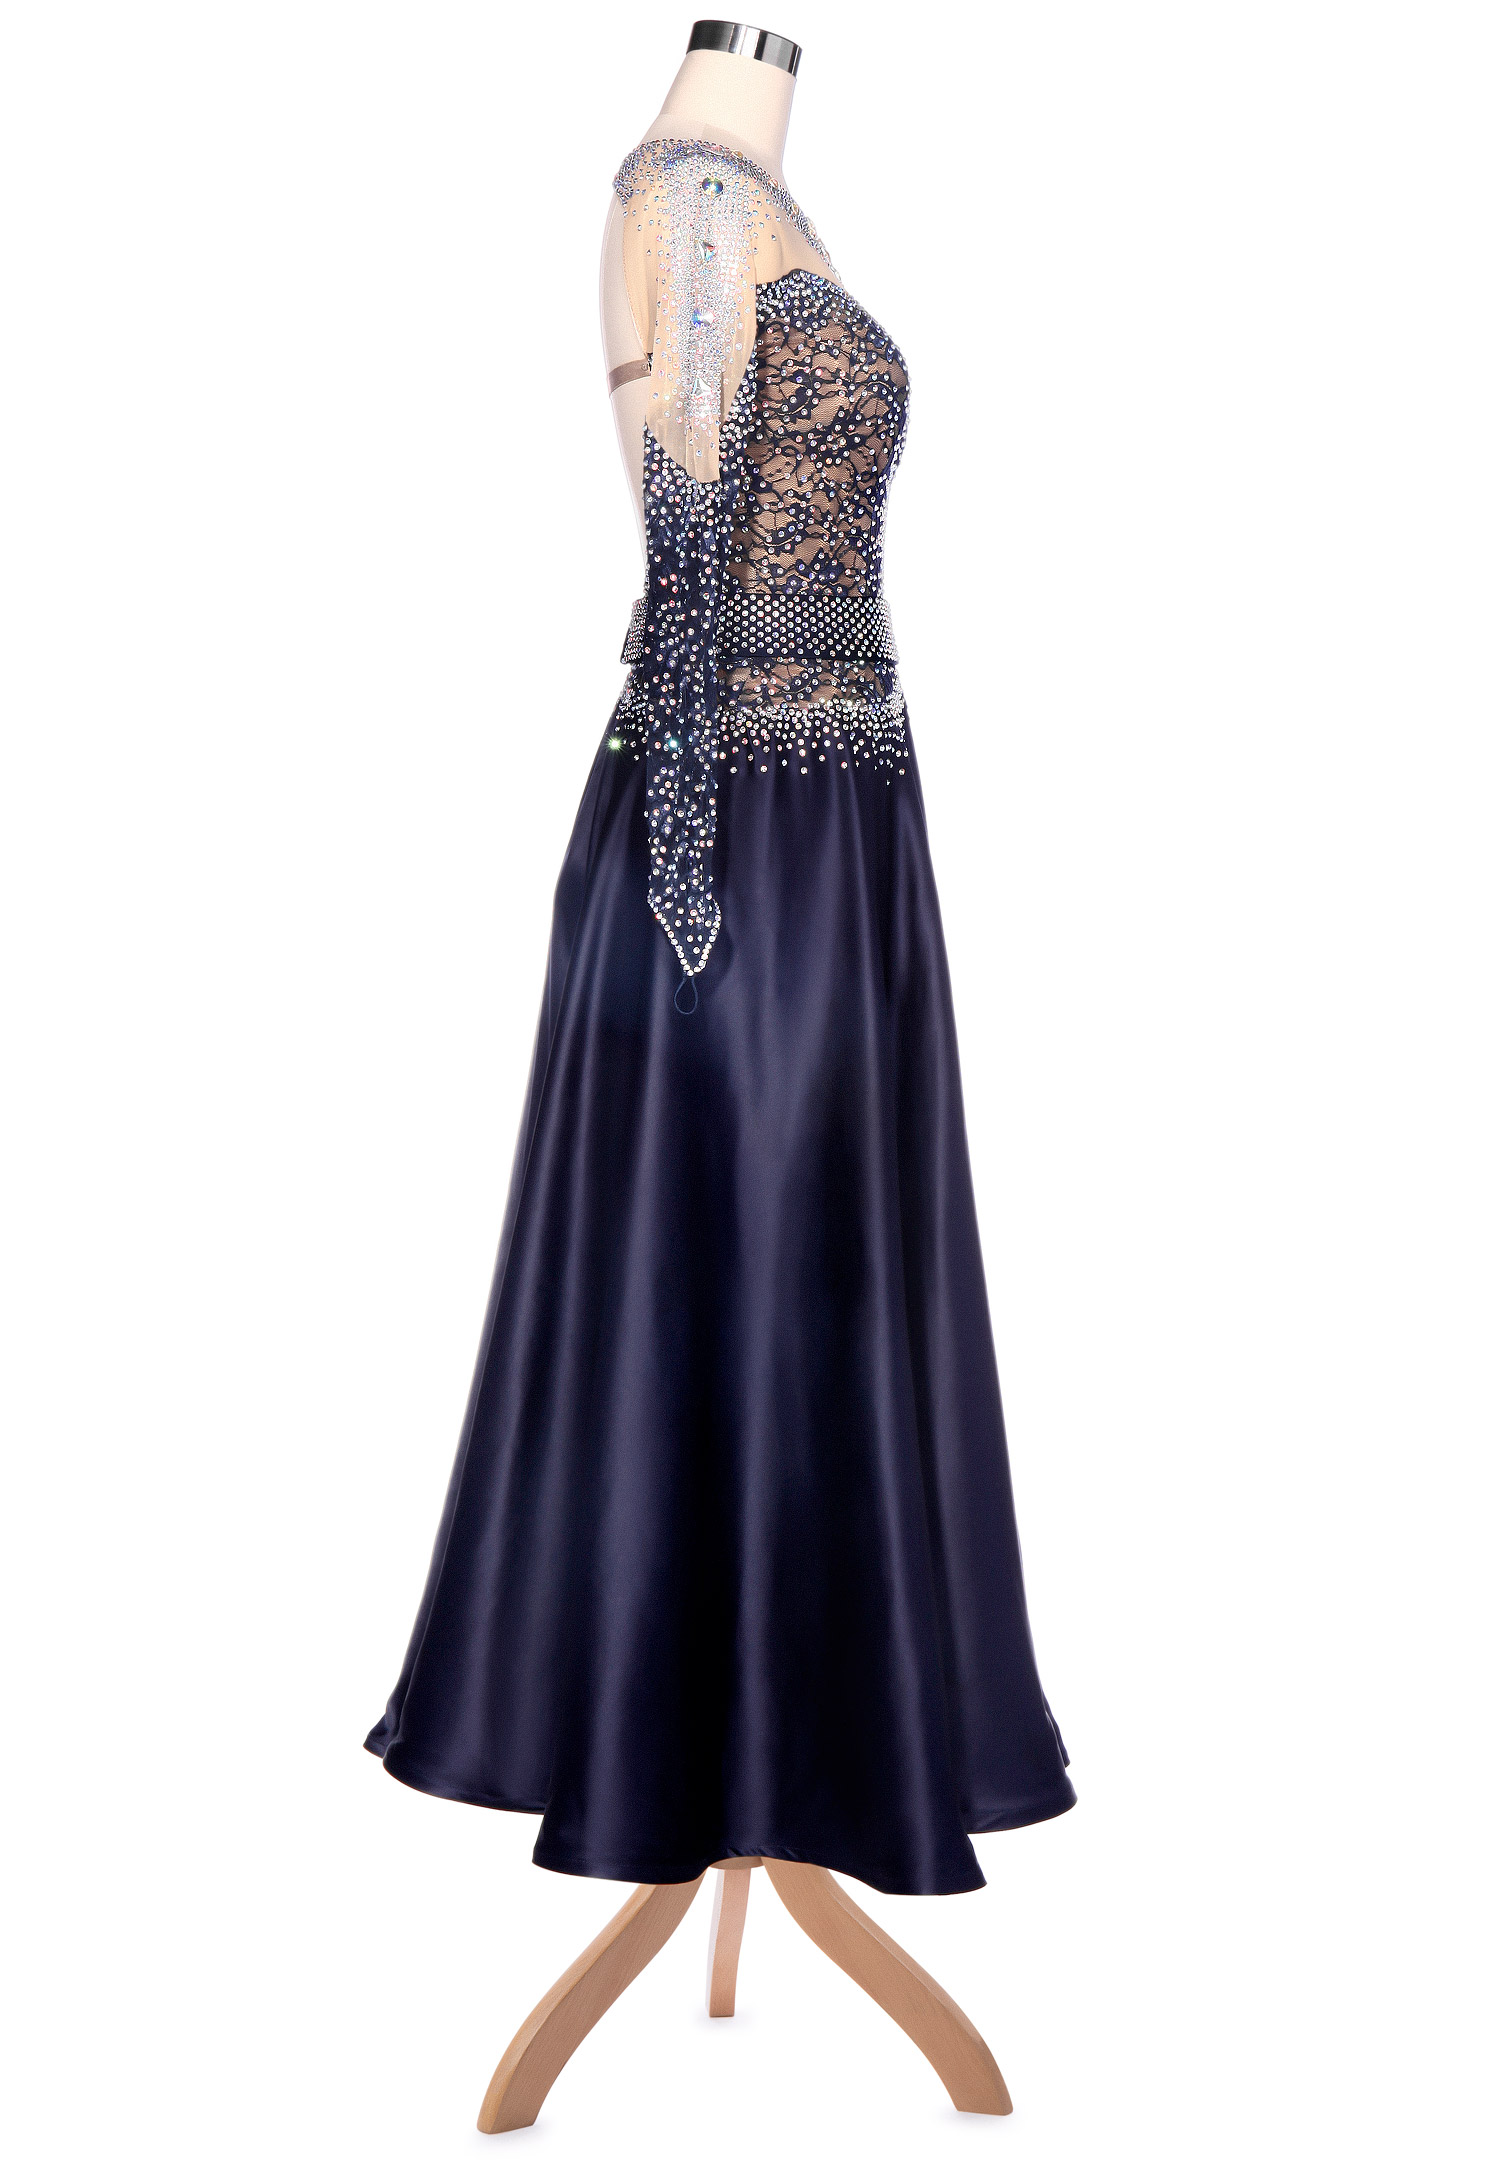 Royal Blue Lace & Satin African American Prom Dress - Promfy